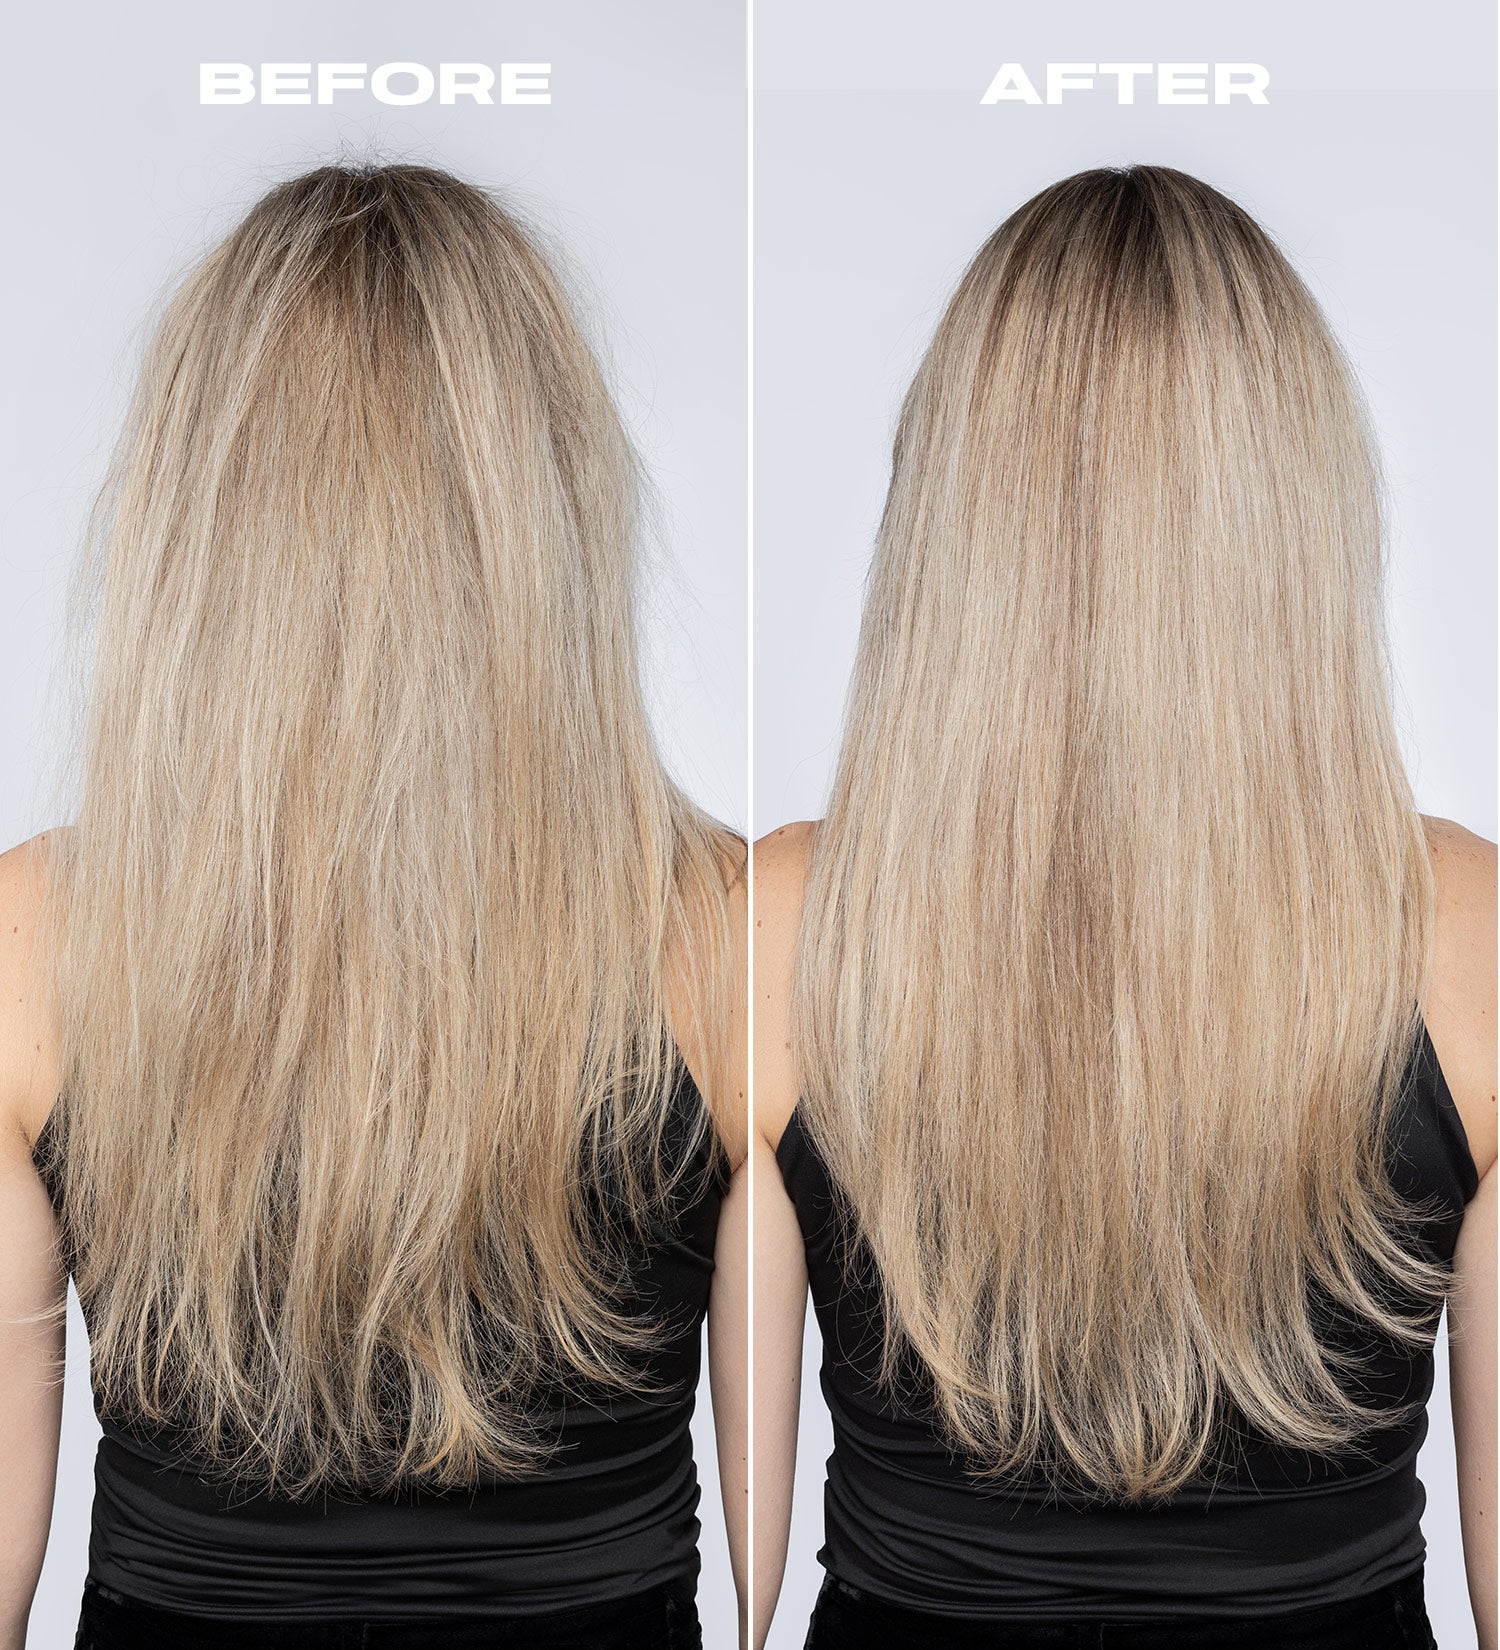 Before and after blonde hair model after using Recalibrate Bond Repair Leave-In Cream